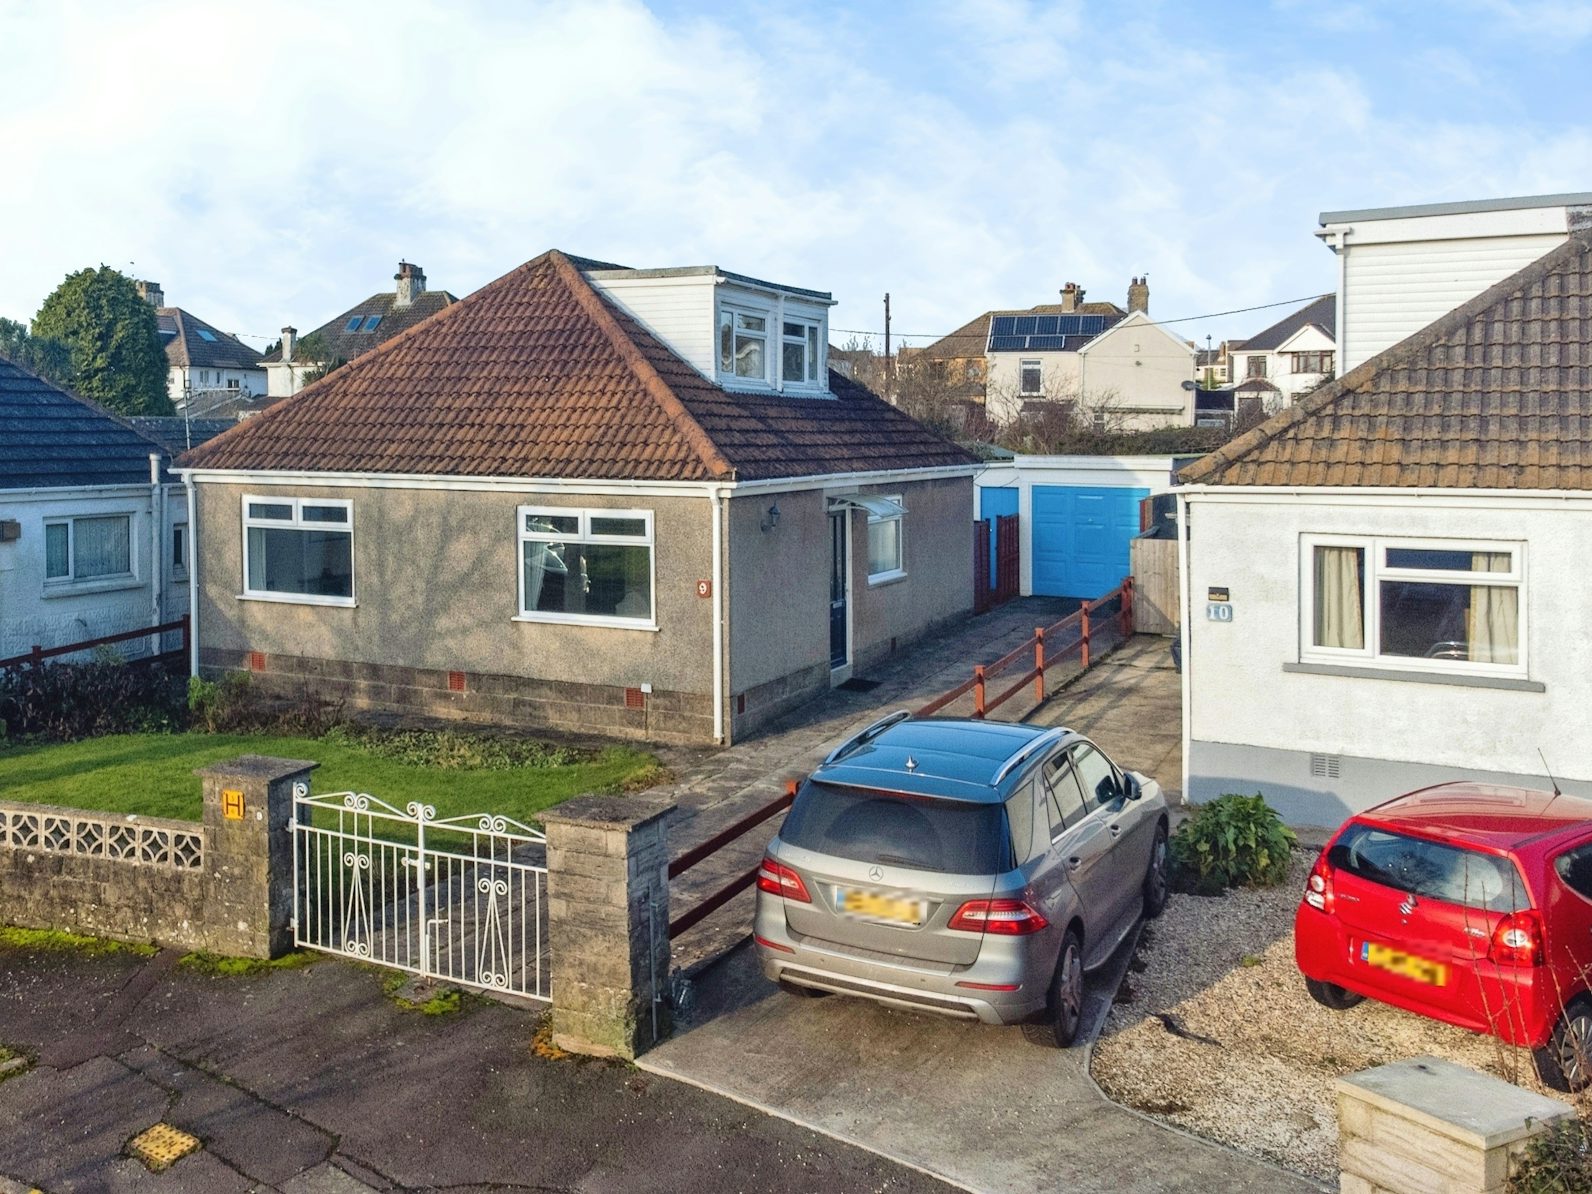 Bungalow for sale on Belvedere Close Kittle, Swansea, SA3